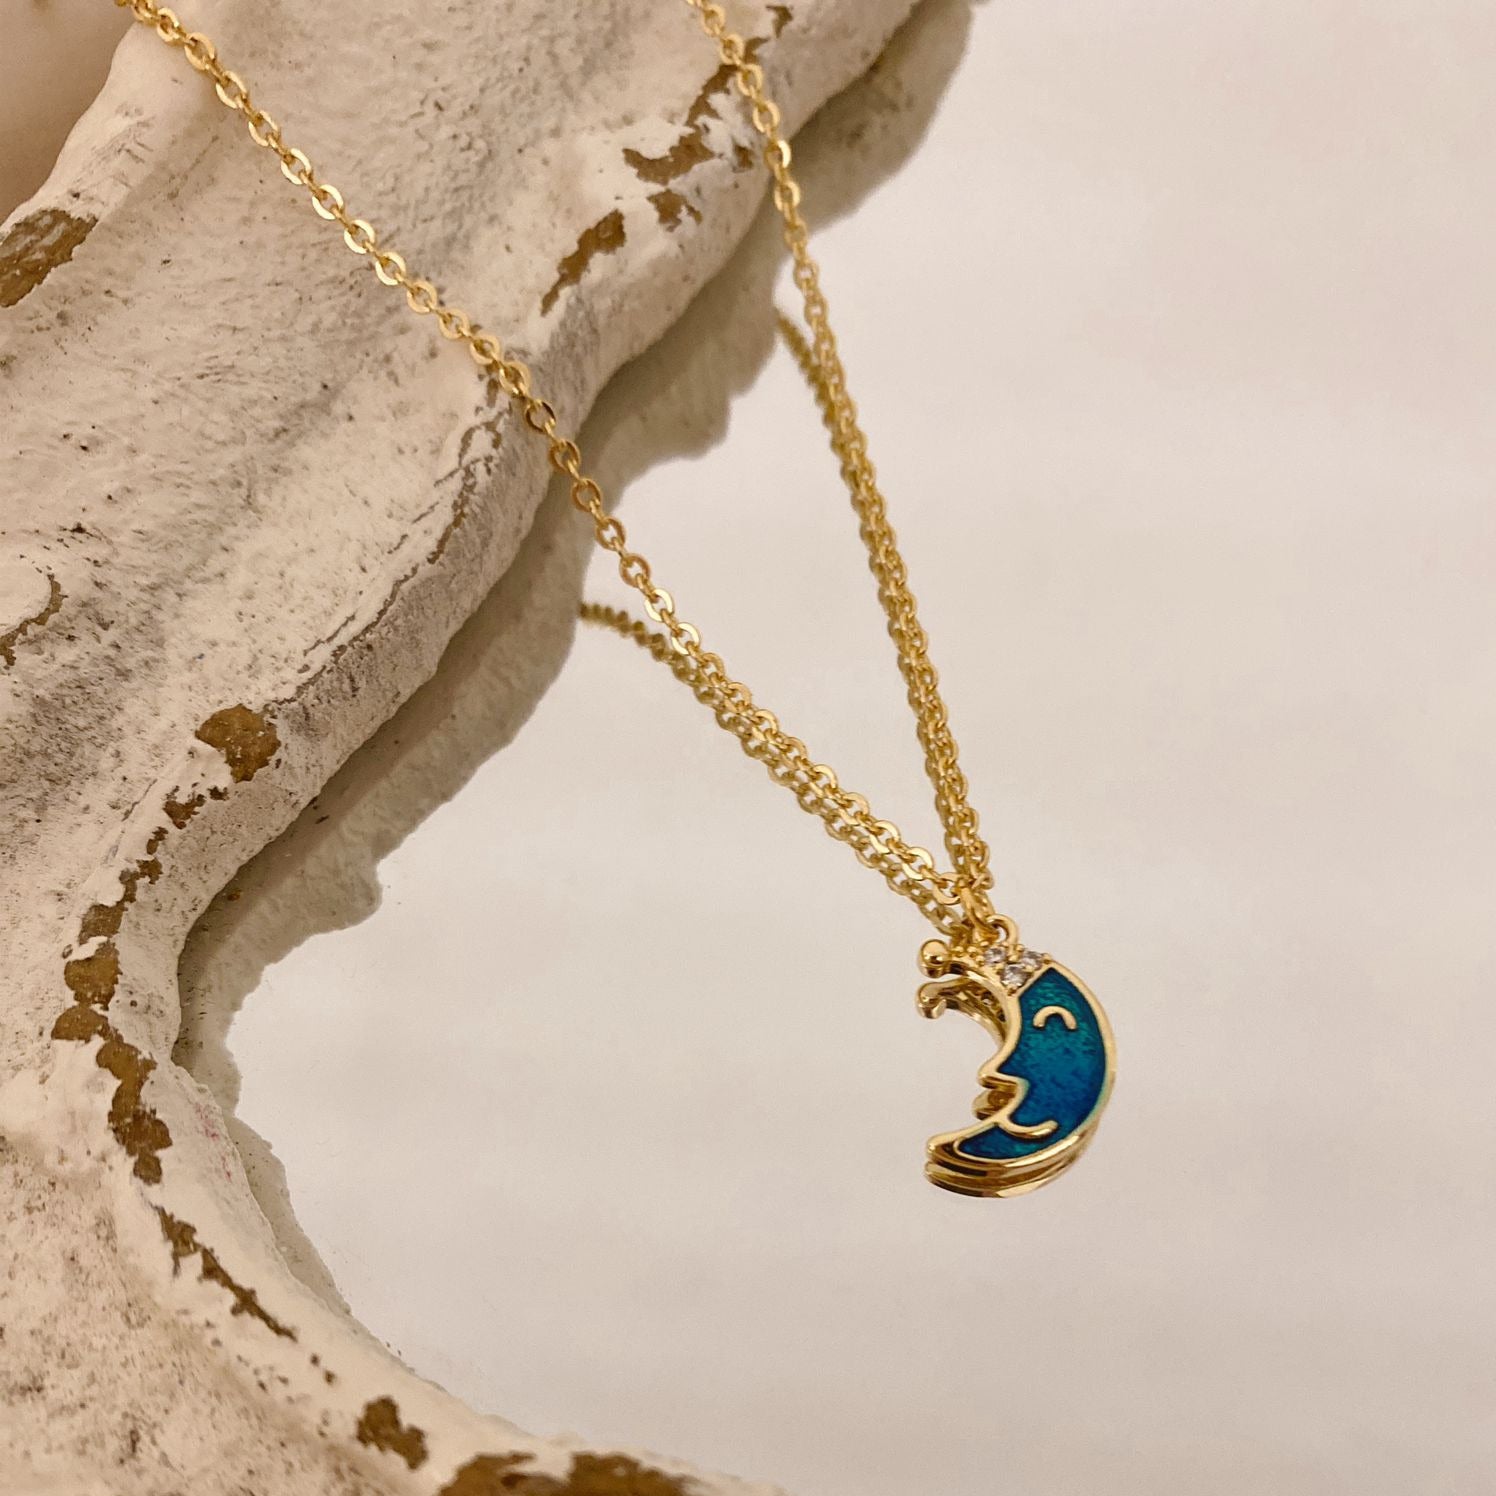 Gold Chain with Moon Charm